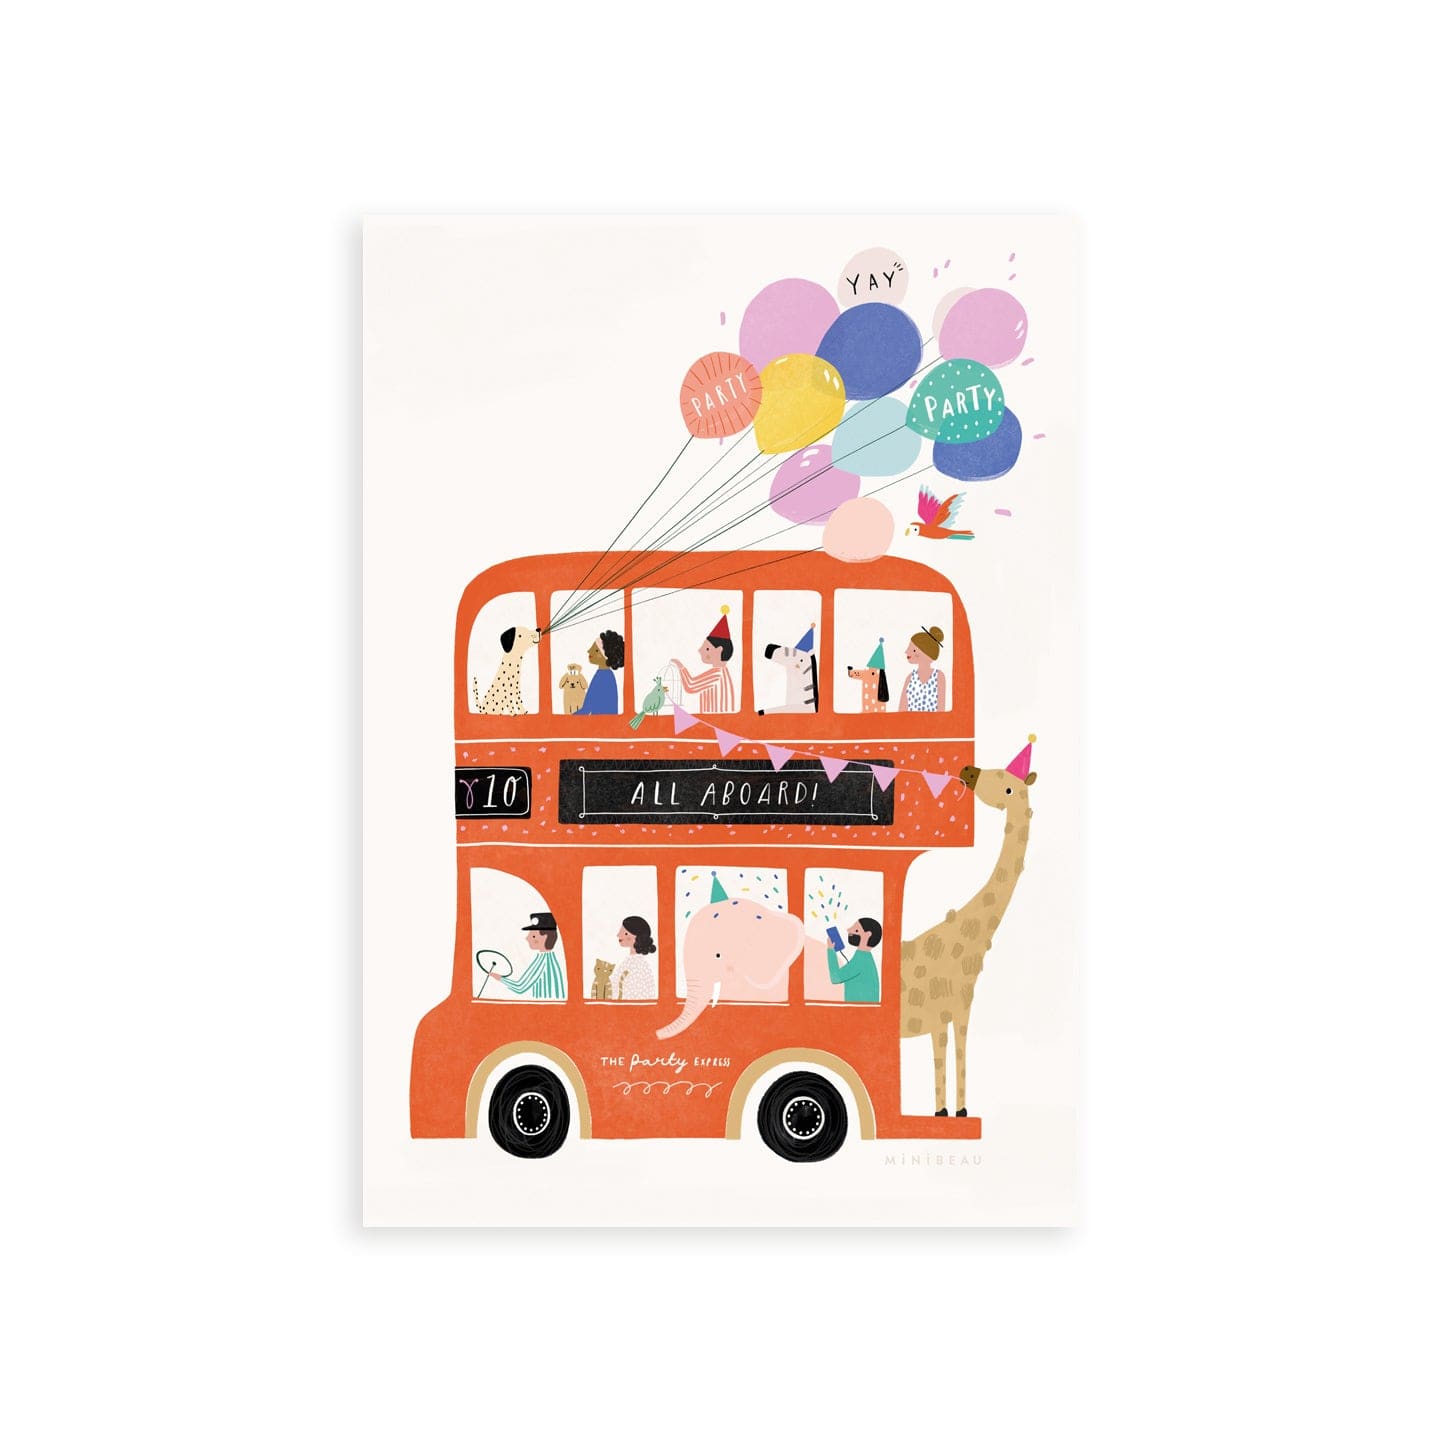 Our double decker bus art print features a Red double decker party bus called The Party Express with people and animals aboard. There is a Dalmatian holding a bunch of balloons out of a top window, a zebra wearing a blue party hat sitting upstairs, elephant hanging out of a downstairs window and a giraffe holding bunting on the back of the bus. There is a cat on the lower deck and a man firing confetti over the elephant.